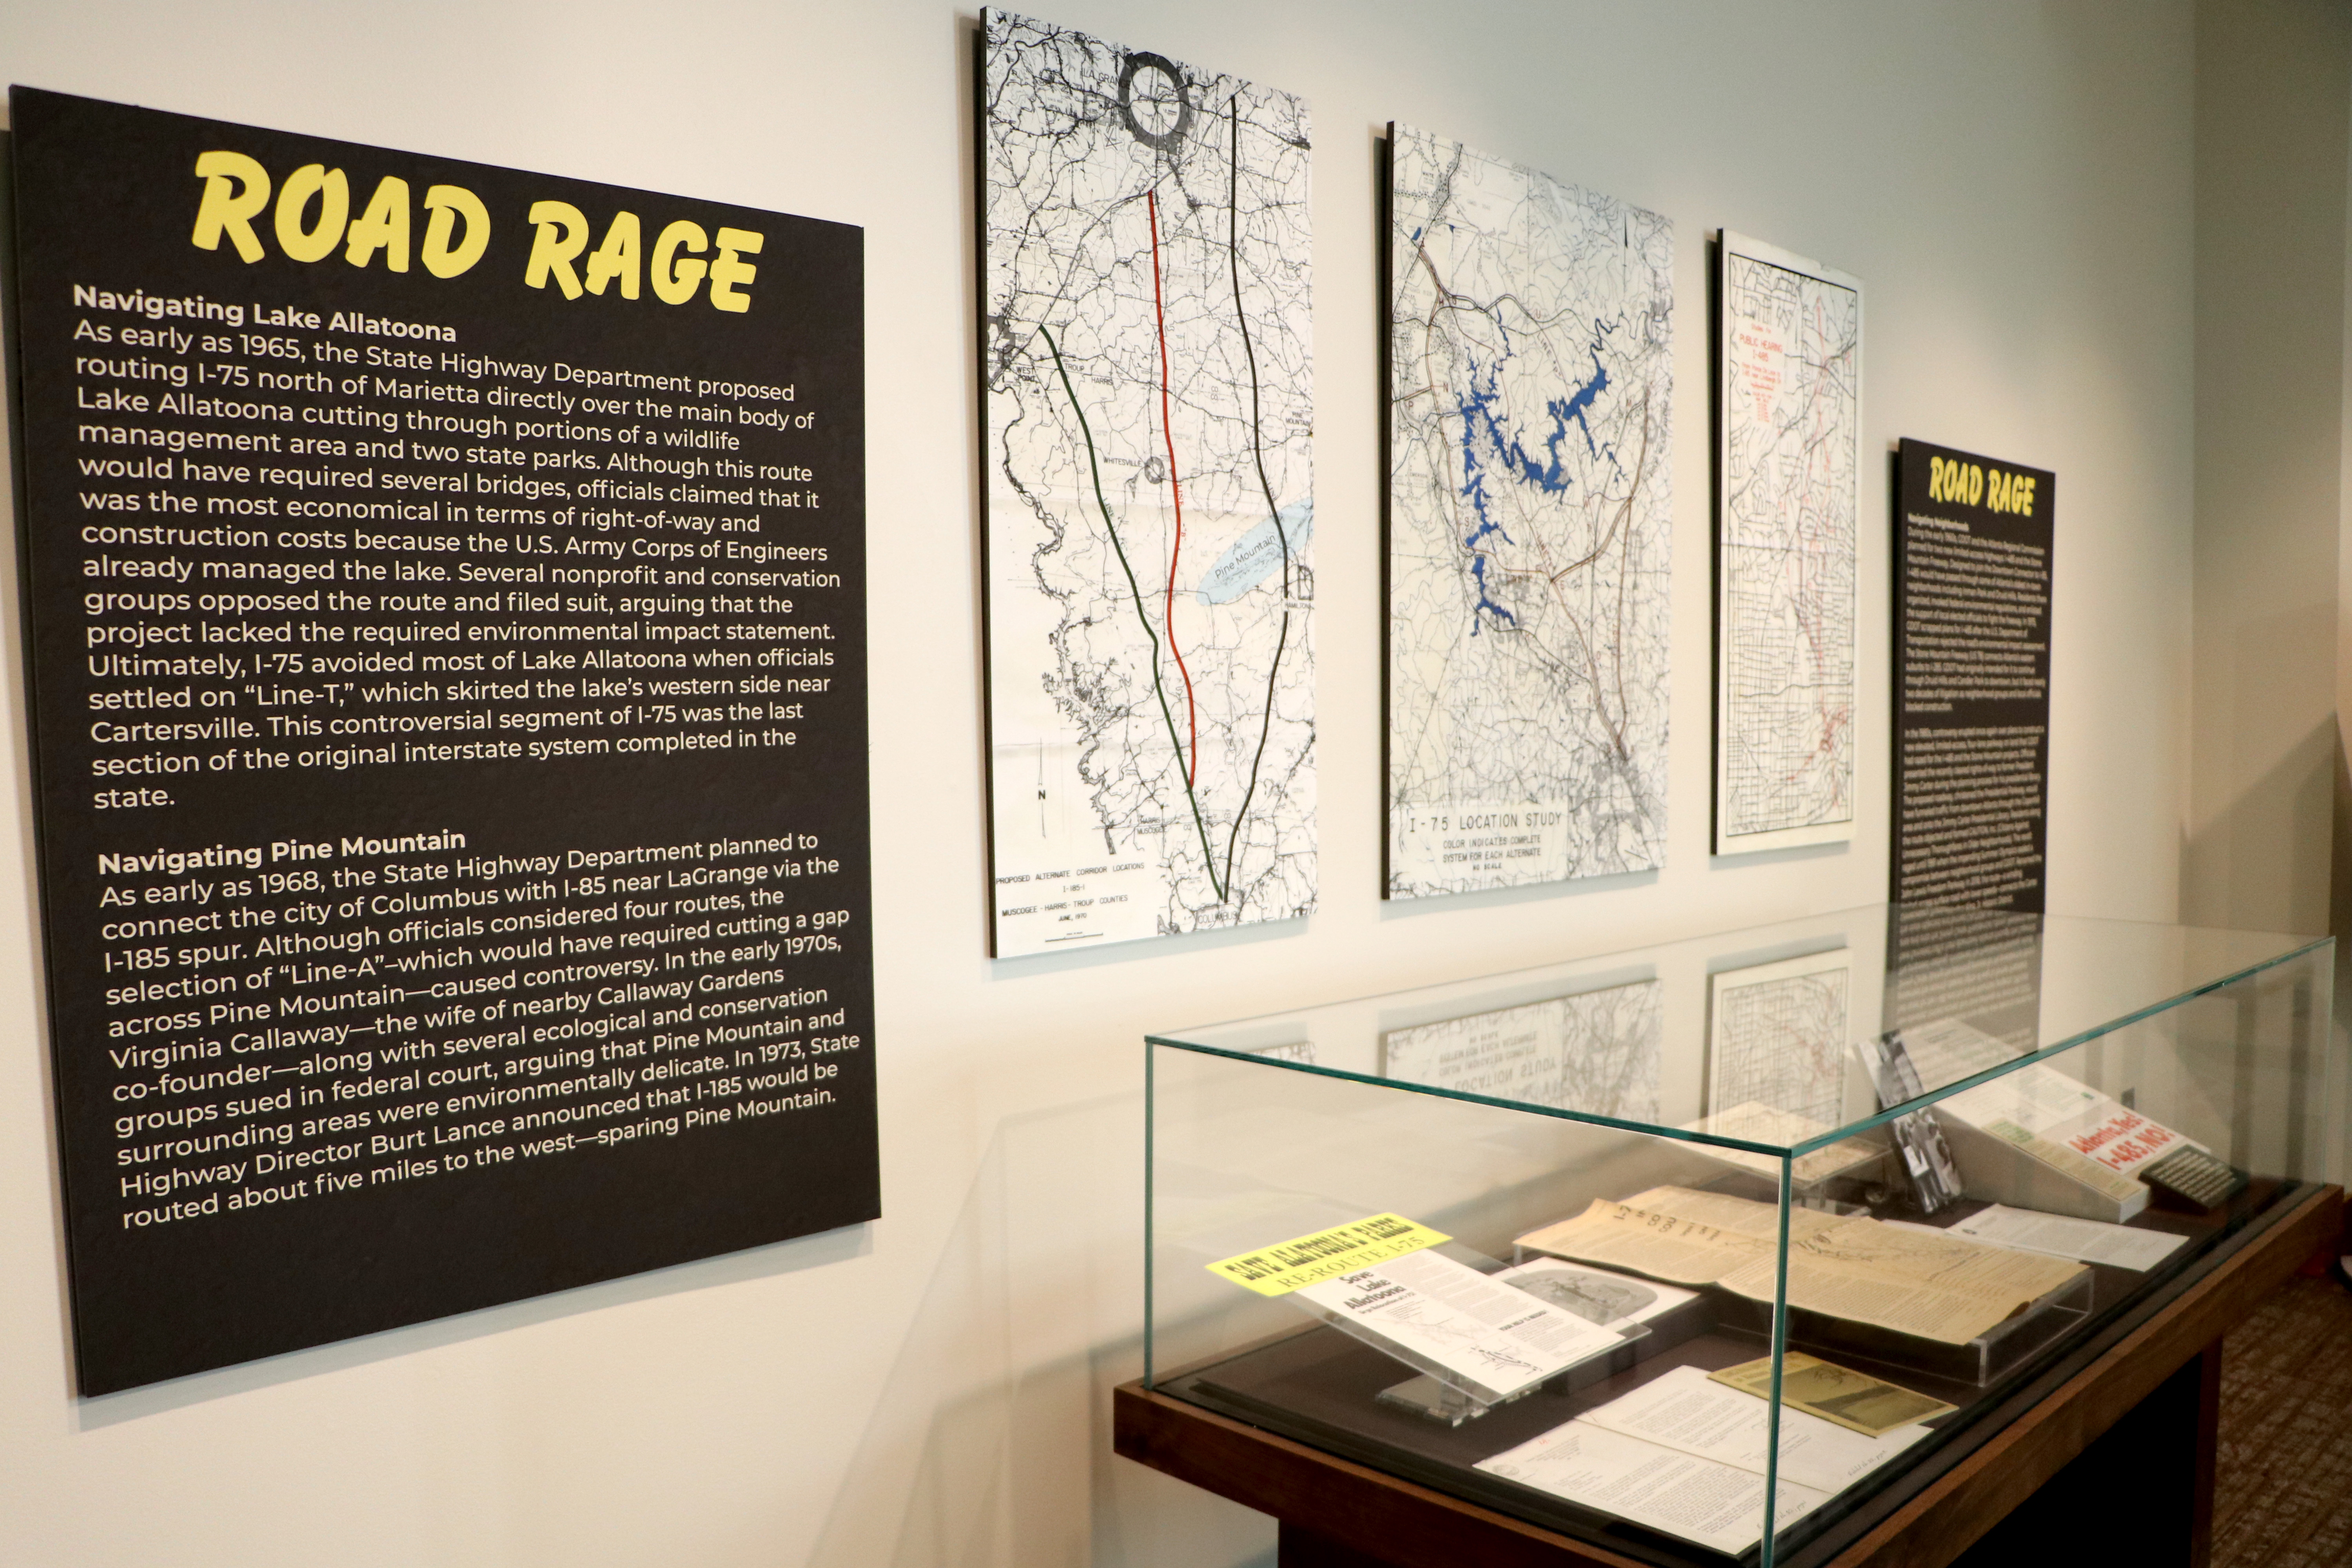 Display case with road signs and maps "Road Rage"